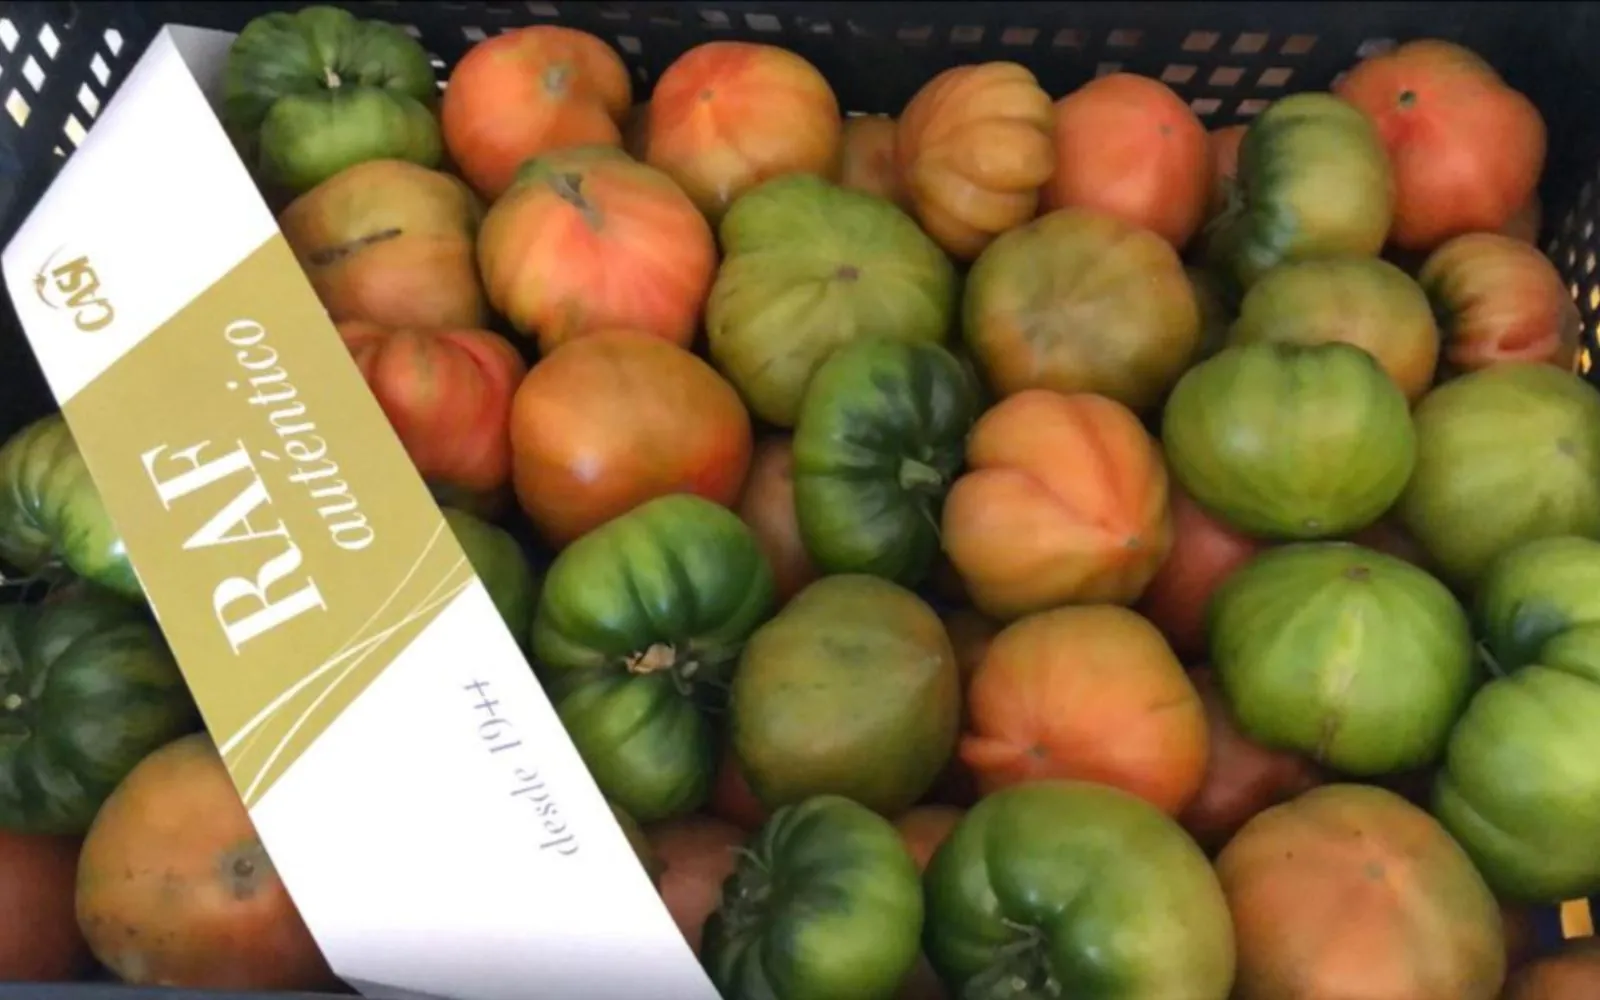 A box with raf tomatoes